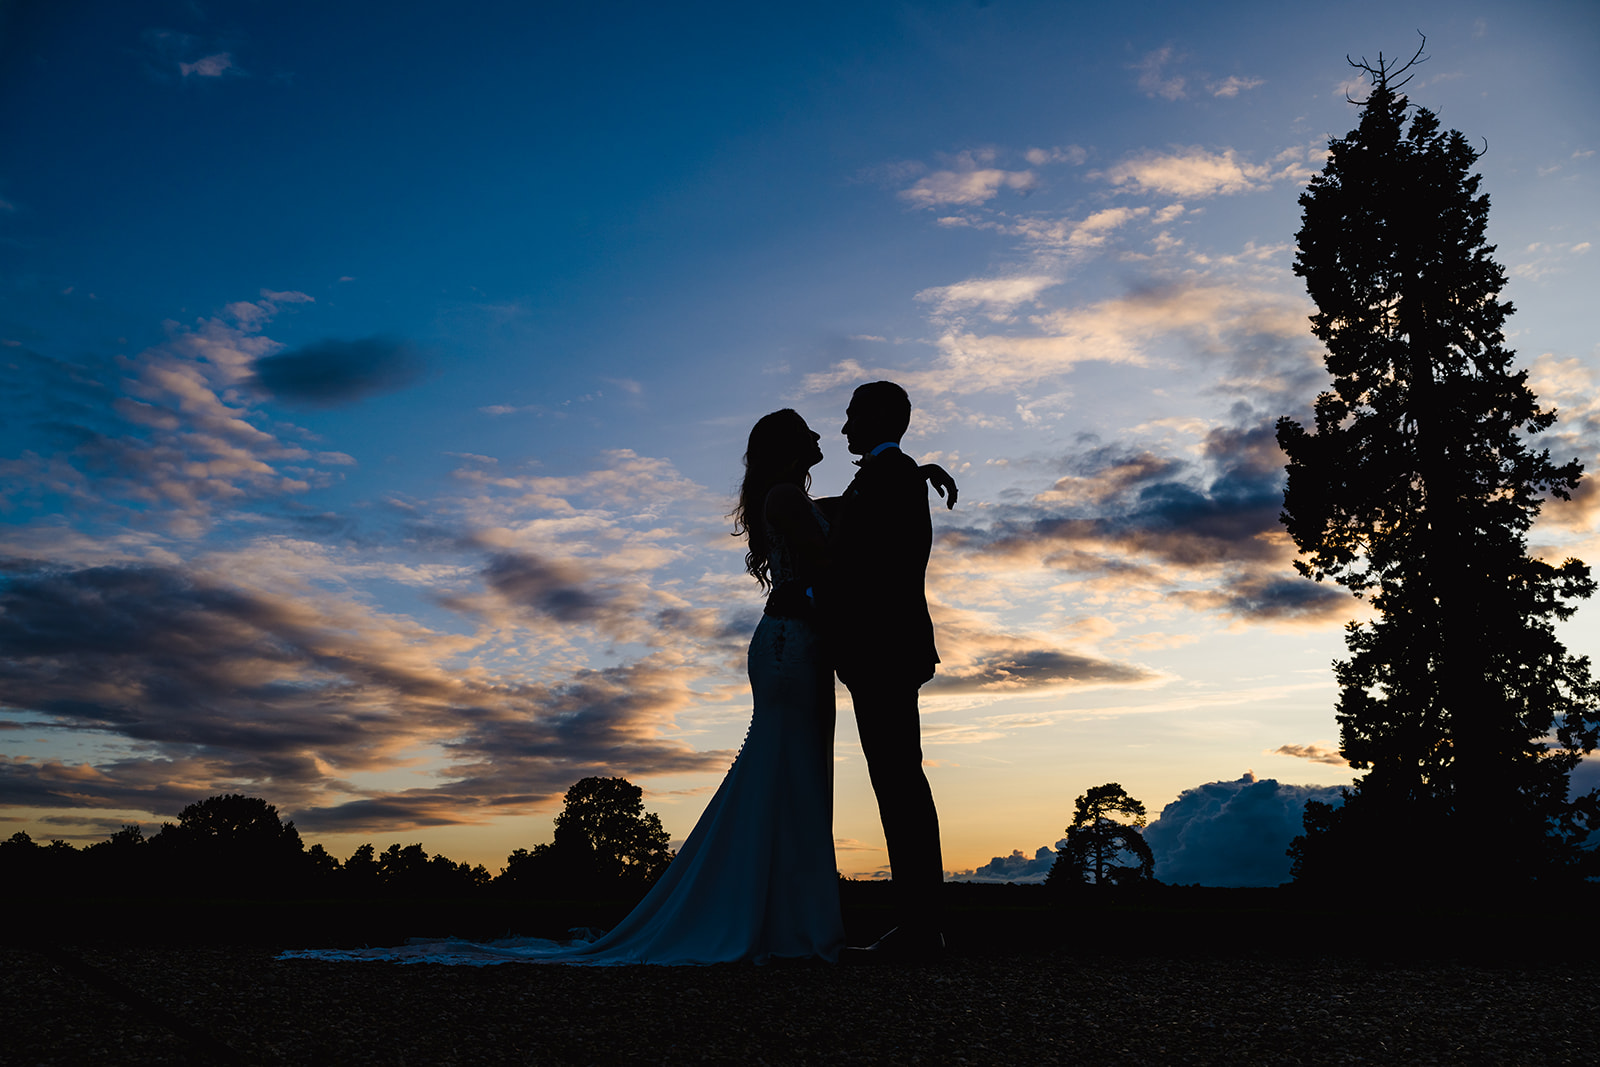 Sunset silhouette at gosfield hall